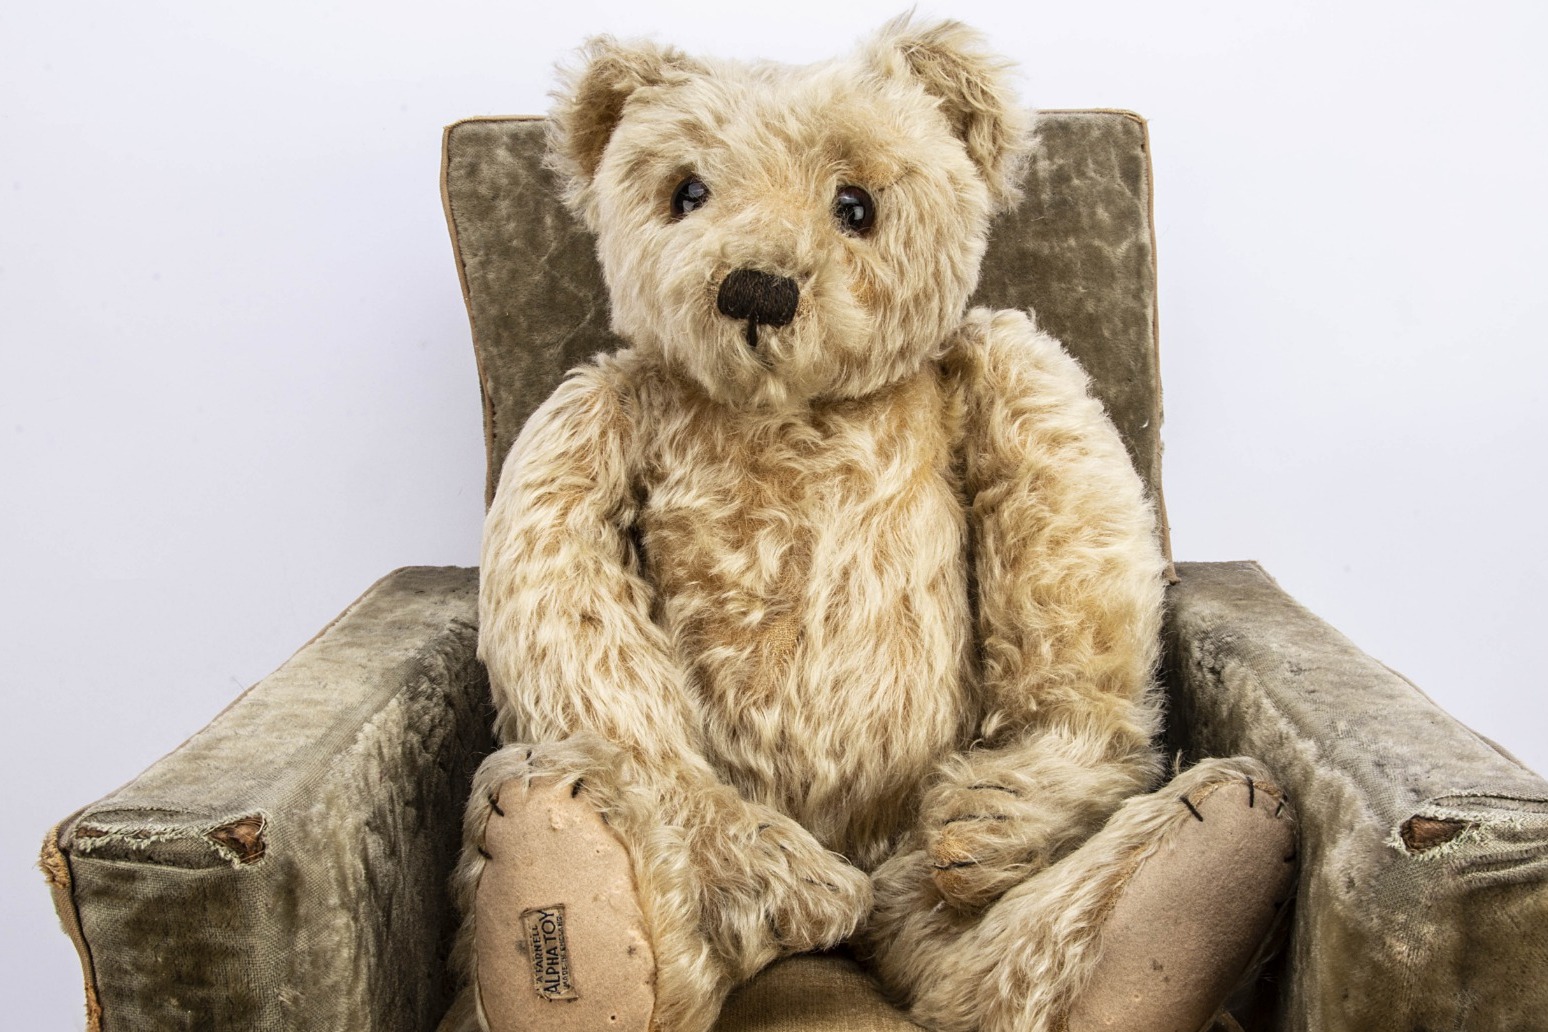 Teddy collector set to auction more than 1,000 bears accumulated over 58 years 